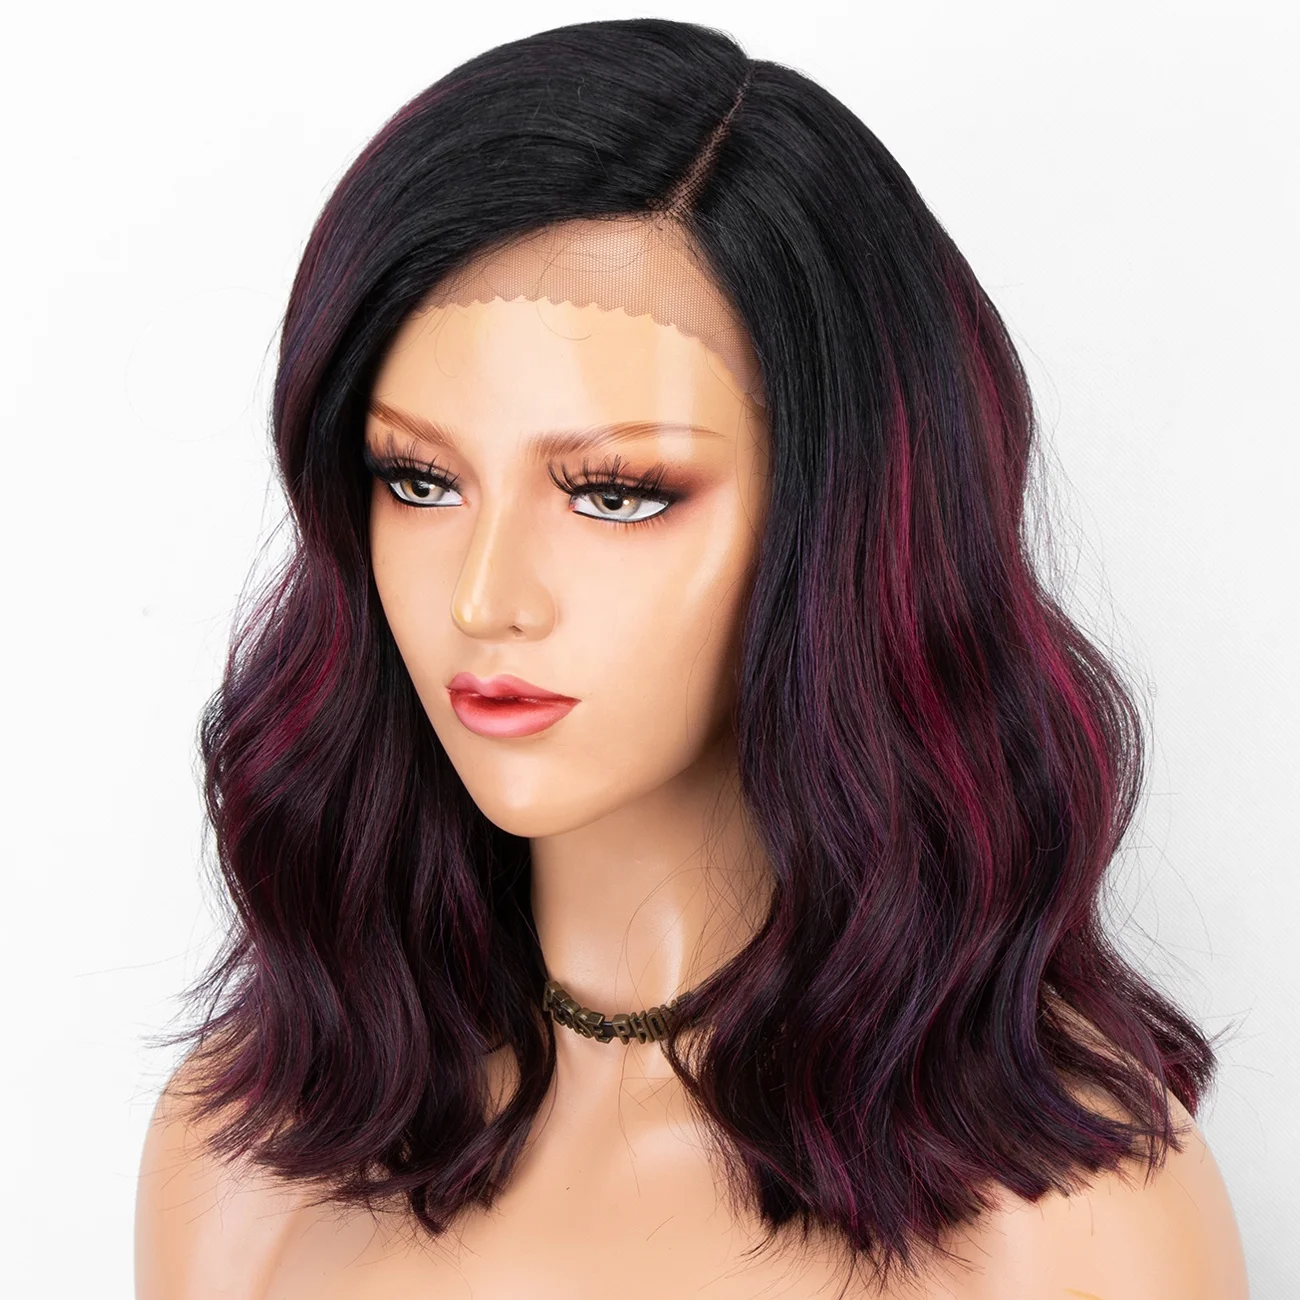 

Aliblisswig Heat OK 14" Synthetic Lace Front Wig Glueless Ombre Bungundy Wine Red Short Bob Wavy Lace Front Synthetic Hair Wigs, Dark root ombre bungundy wine red bob lace front wigs